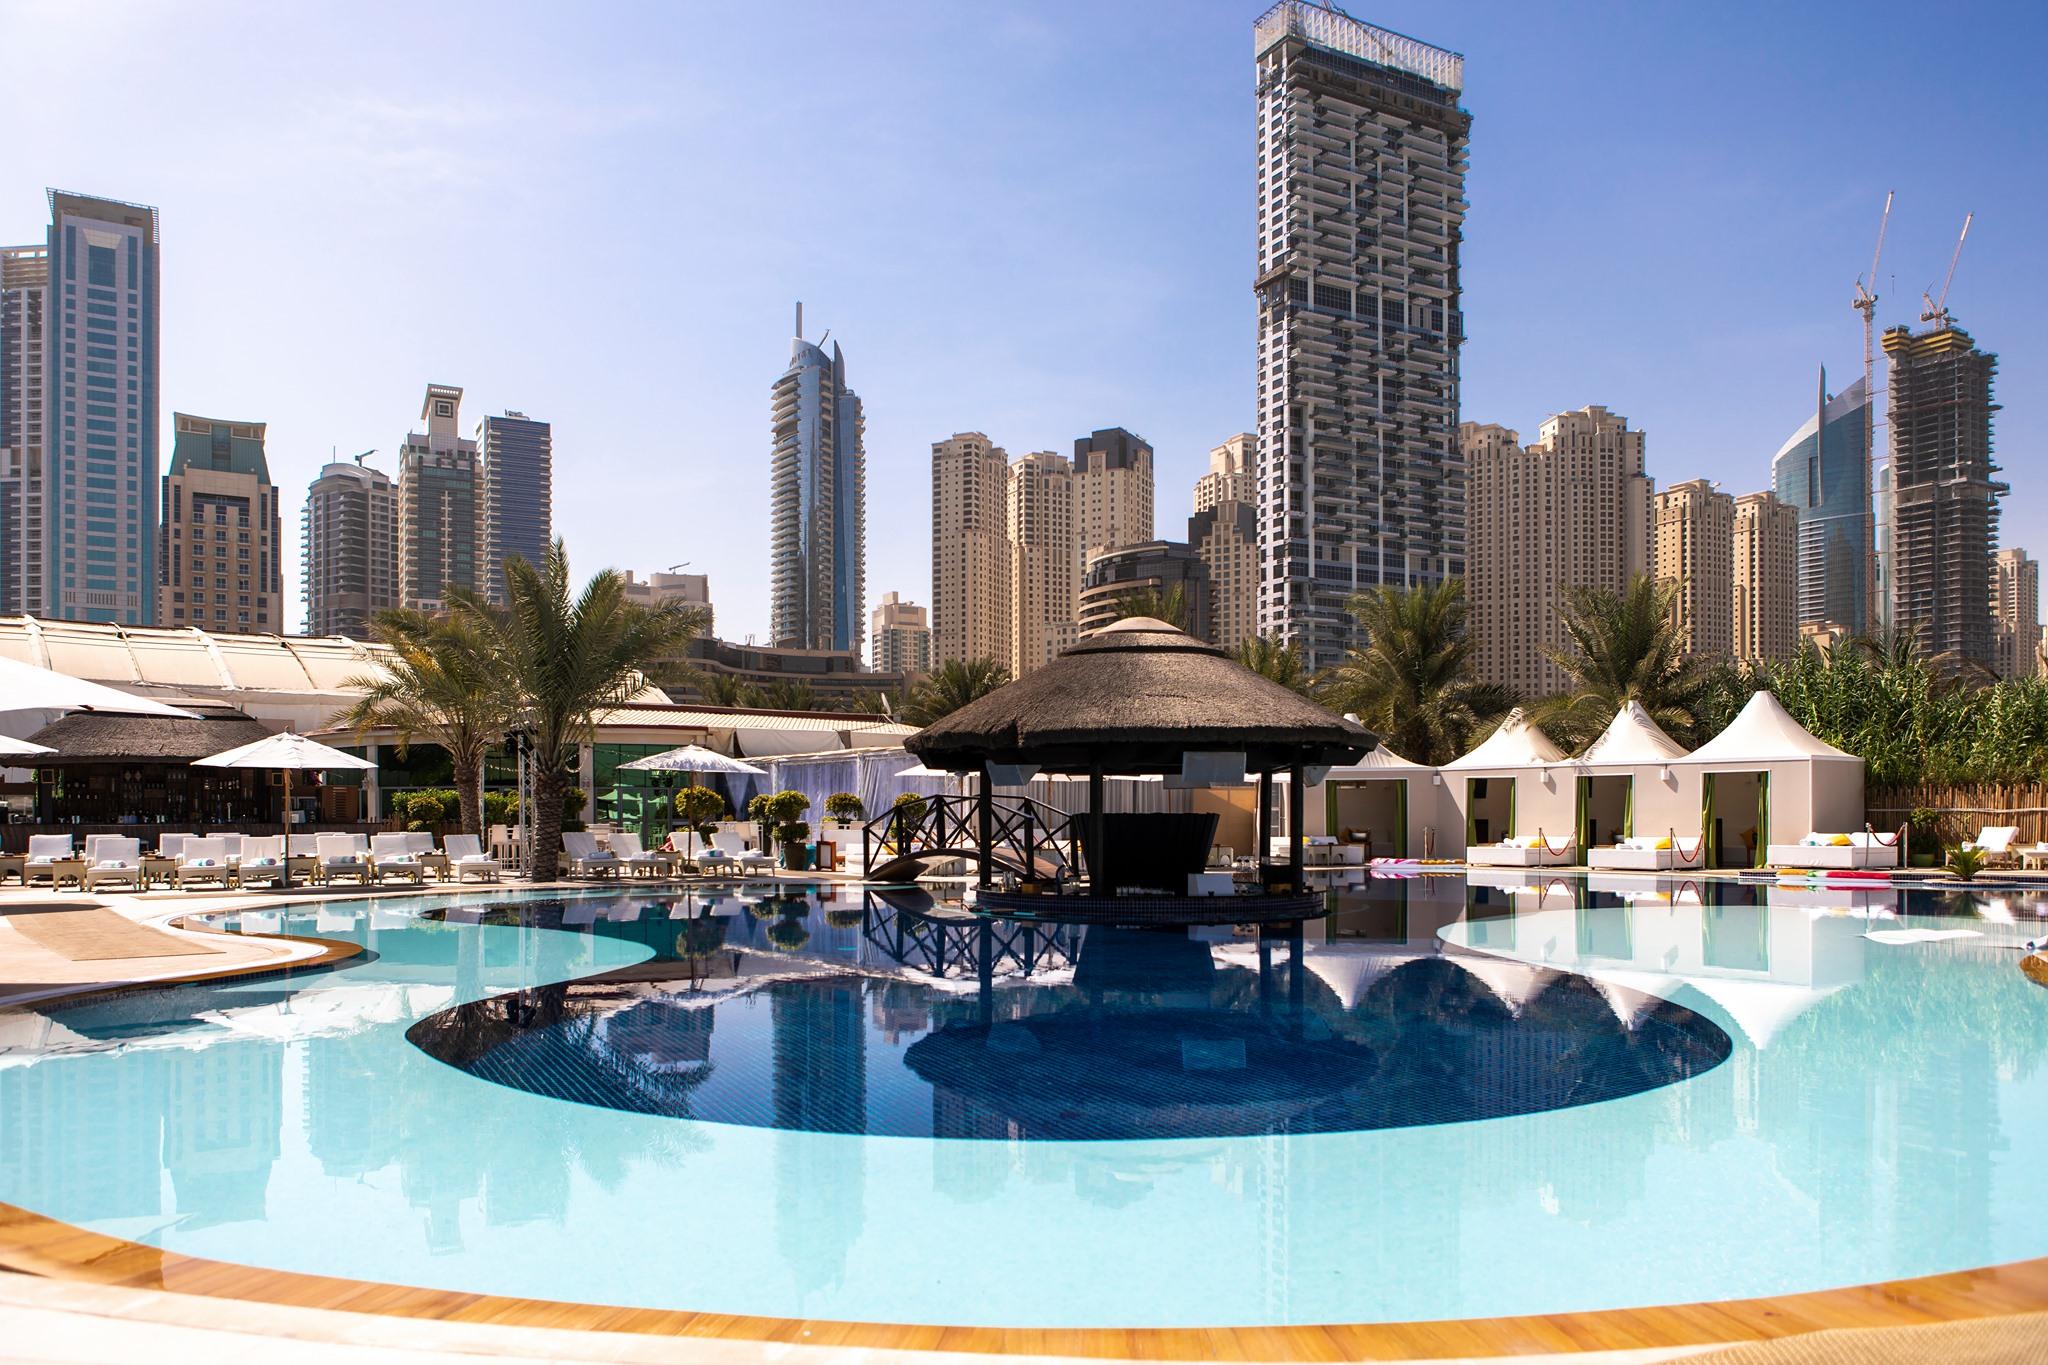 POOL AND BEACH DAYS IN DUBAI TO CHECK OUT THIS WEEK